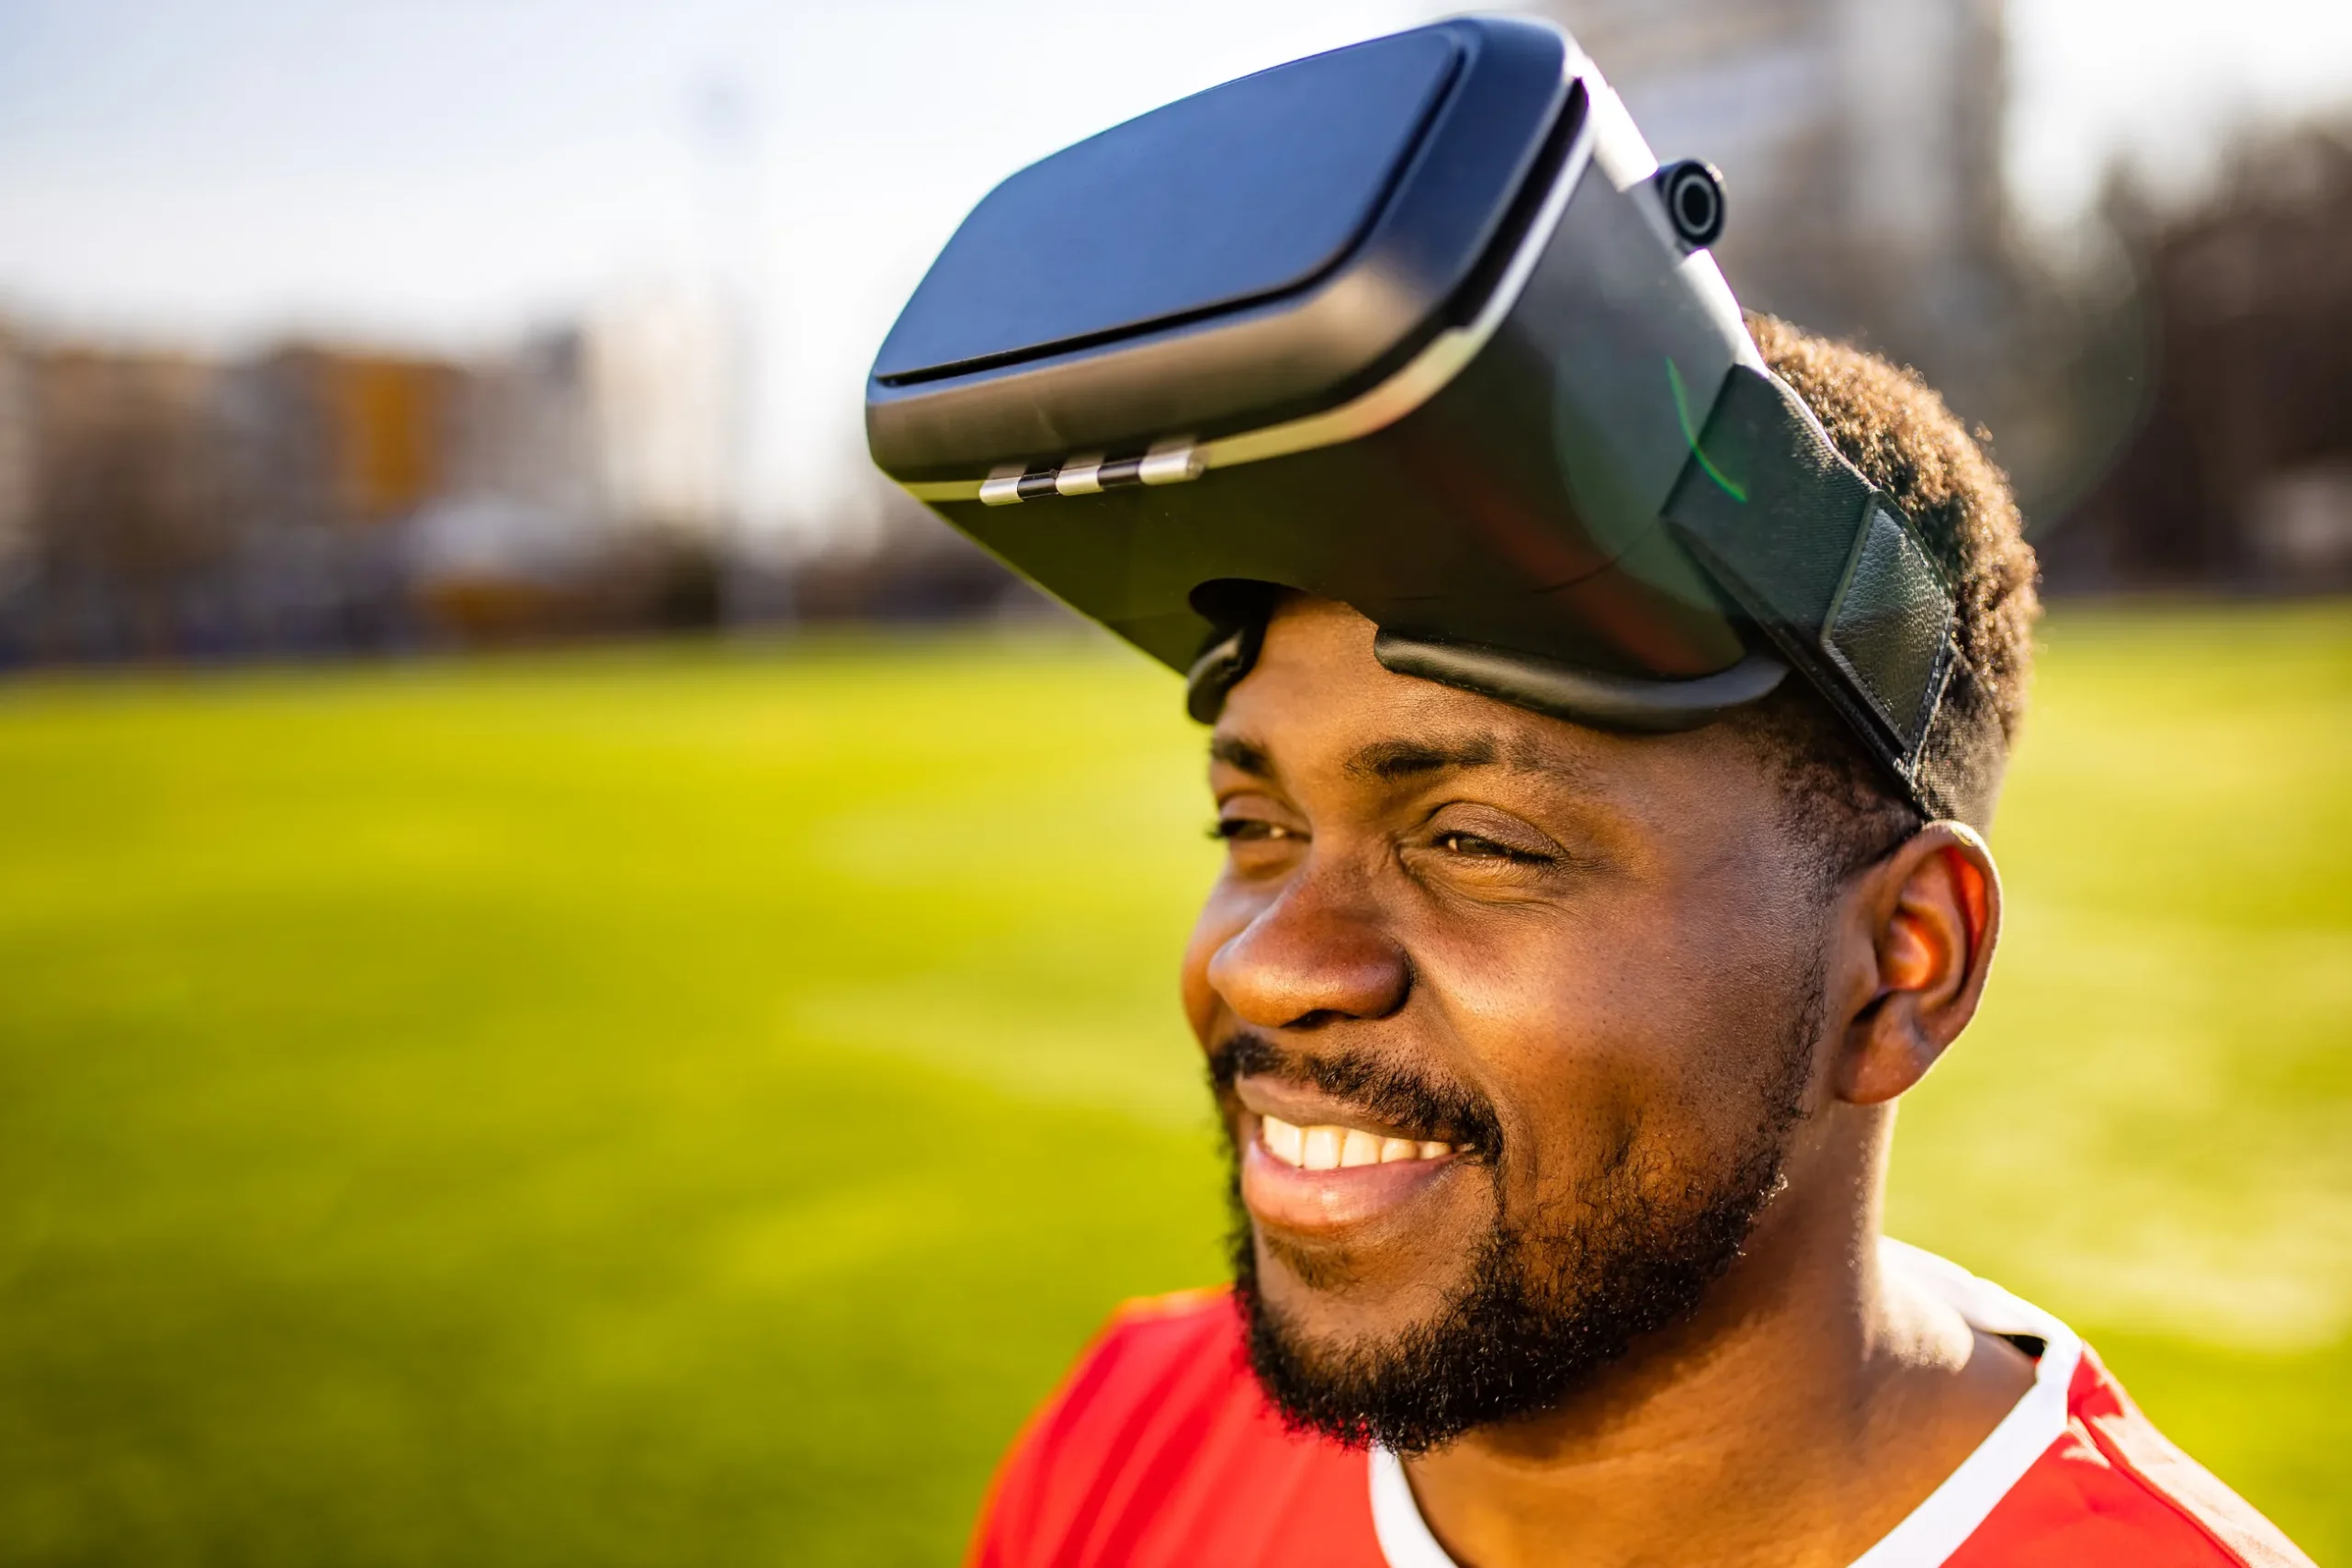 View Products In Immersive 3D: Happy Man witnessing Reality after using VR Head-Set.